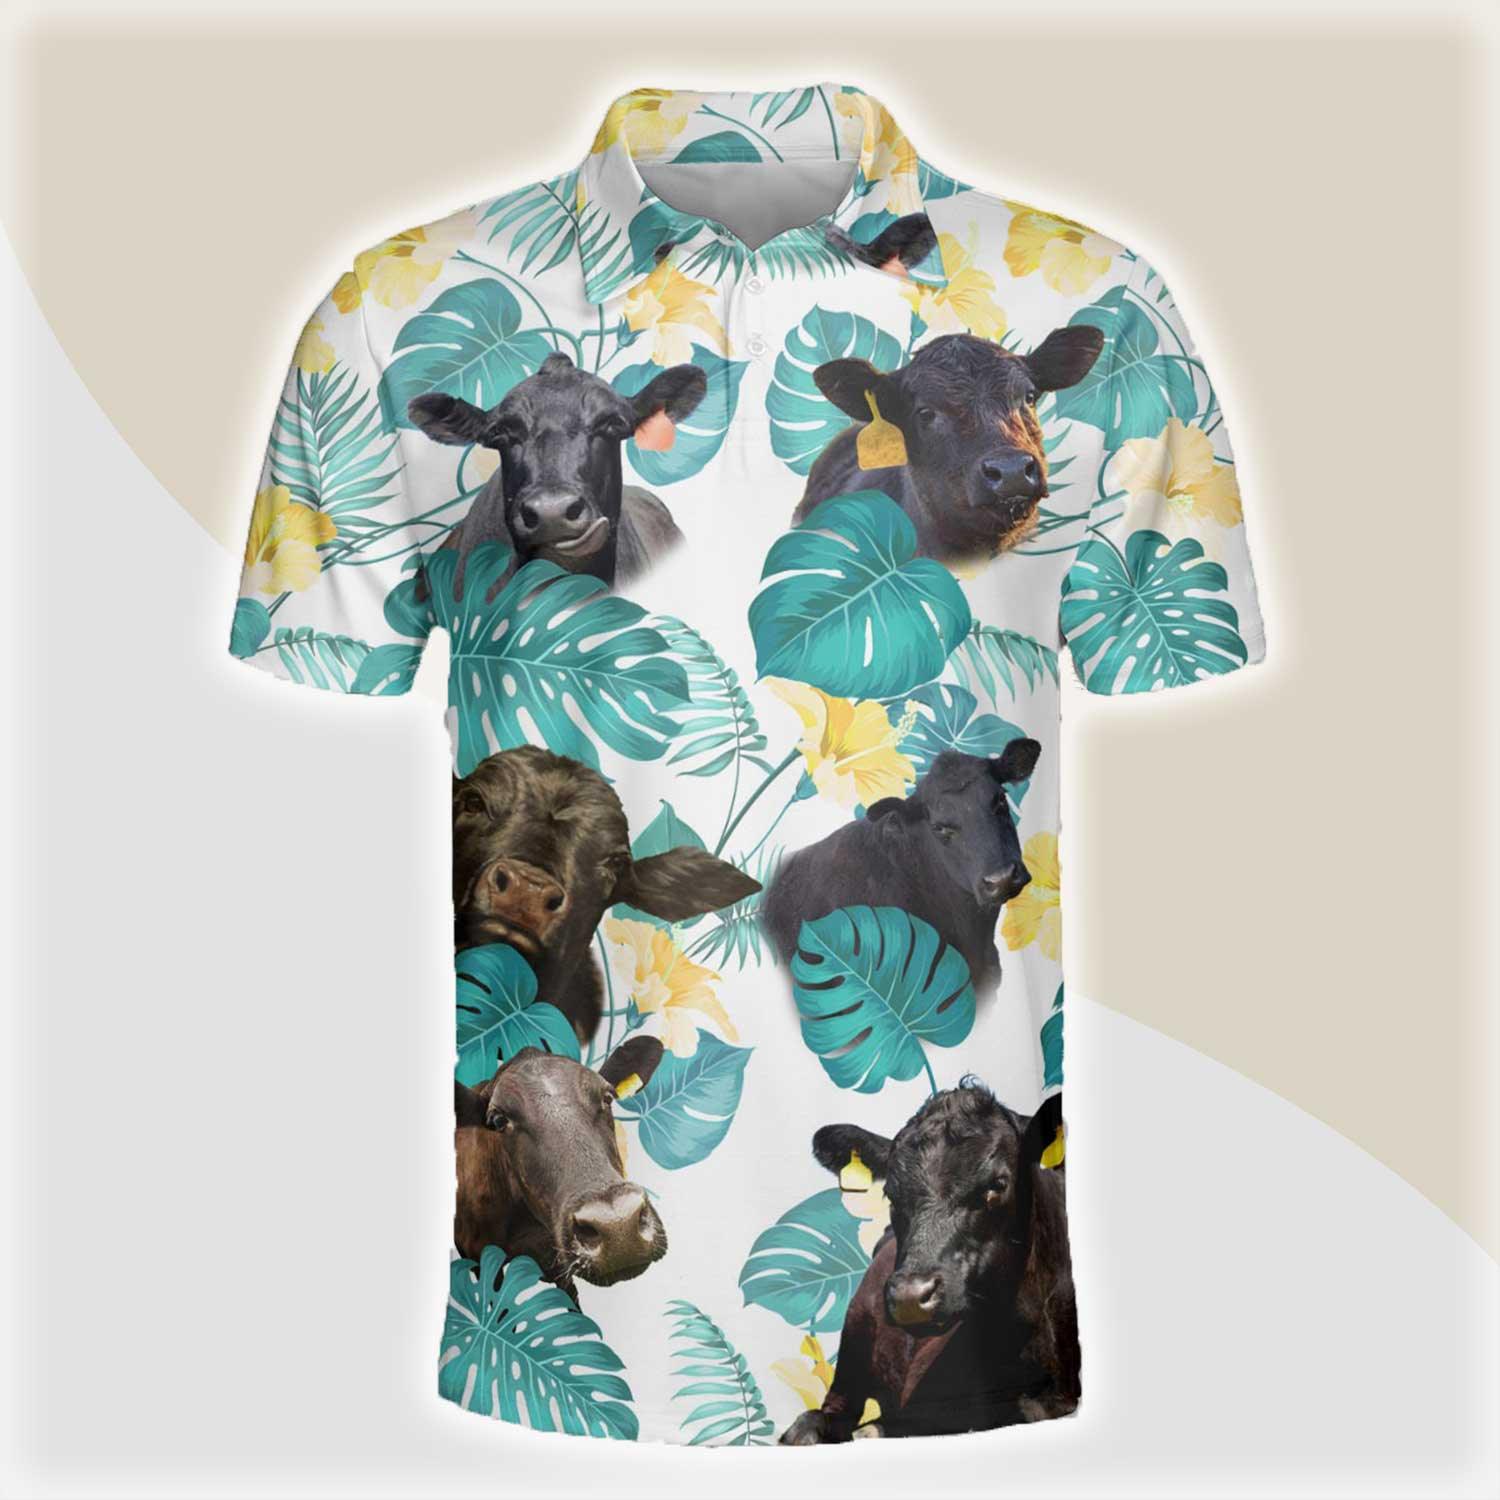 Black Angus Men Polo Shirts For Summer - Black Angus In Tropical Leaves Pattern Button Shirts For Men - Perfect Gift For Black Angus Lovers, Cattle Lovers - Amzanimalsgift